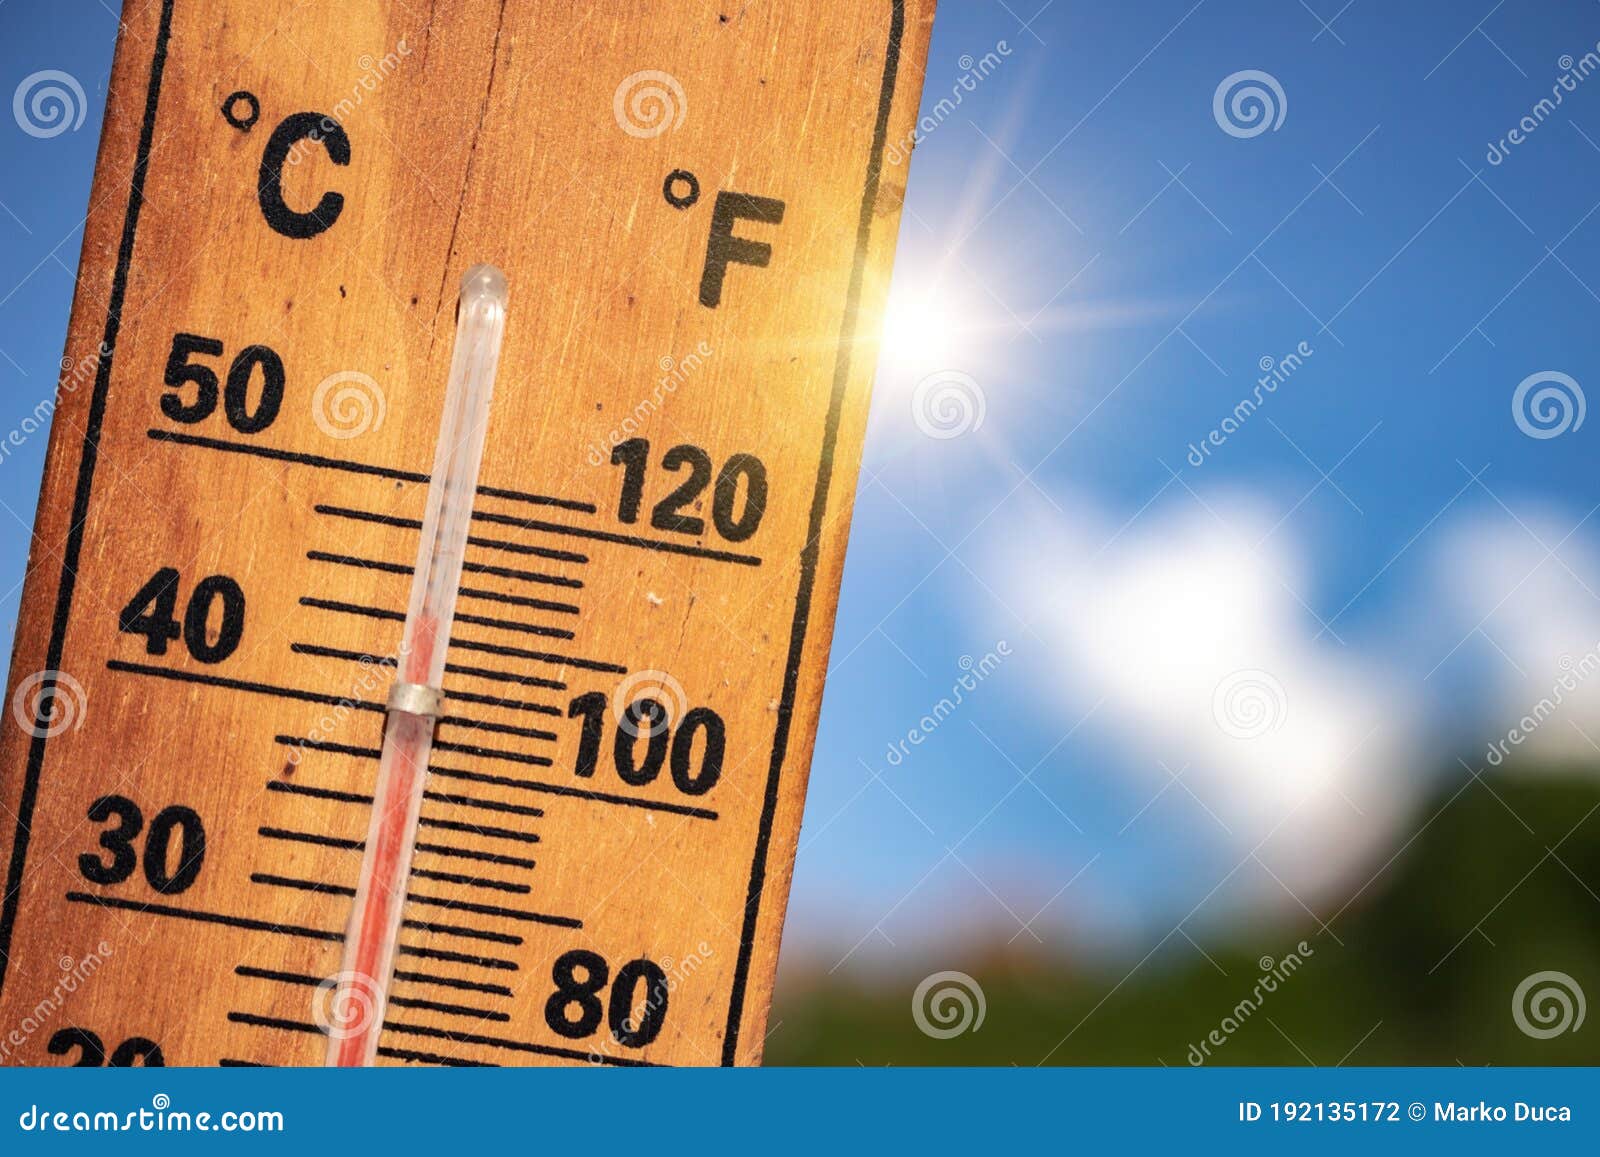 https://thumbs.dreamstime.com/z/thermometer-hot-summer-showing-high-temperature-close-up-sun-blue-sky-background-copy-space-text-192135172.jpg